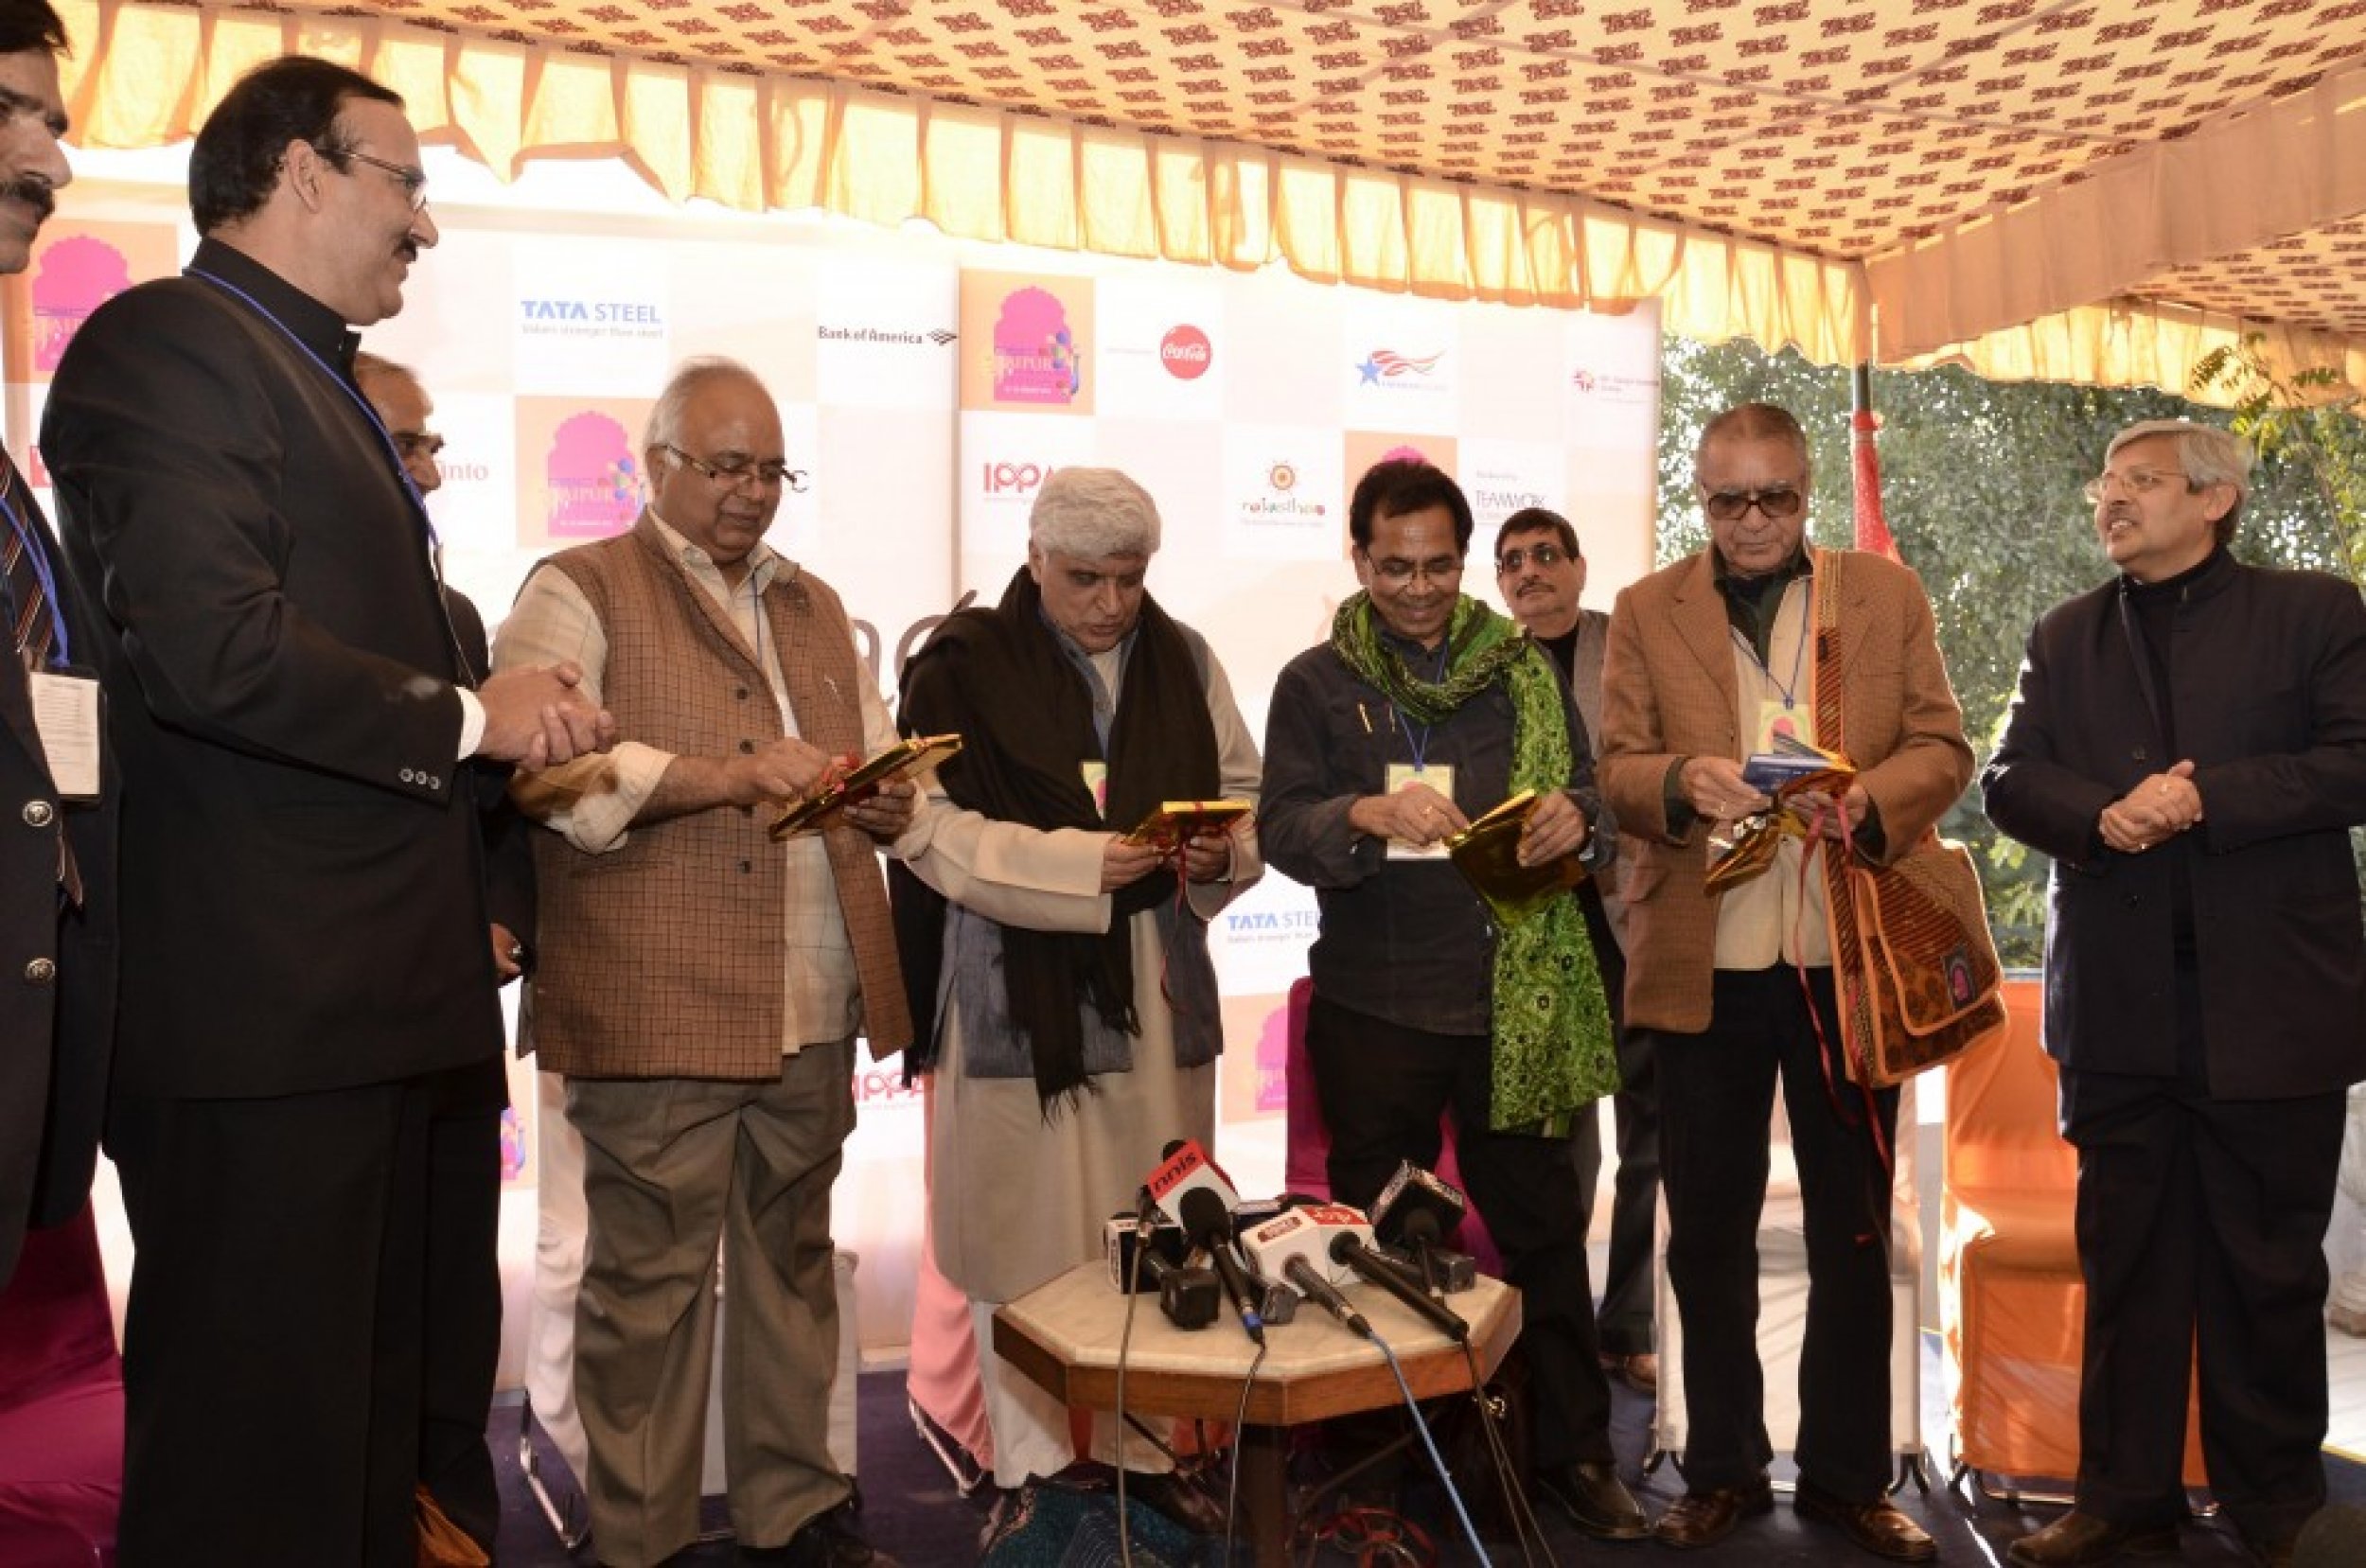 Jaipur Literature Festival 2012. The five-day-long festival aims to showcase the best of Indian, South Asian and international writing in one of the worlds fastest-growing publishing markets.